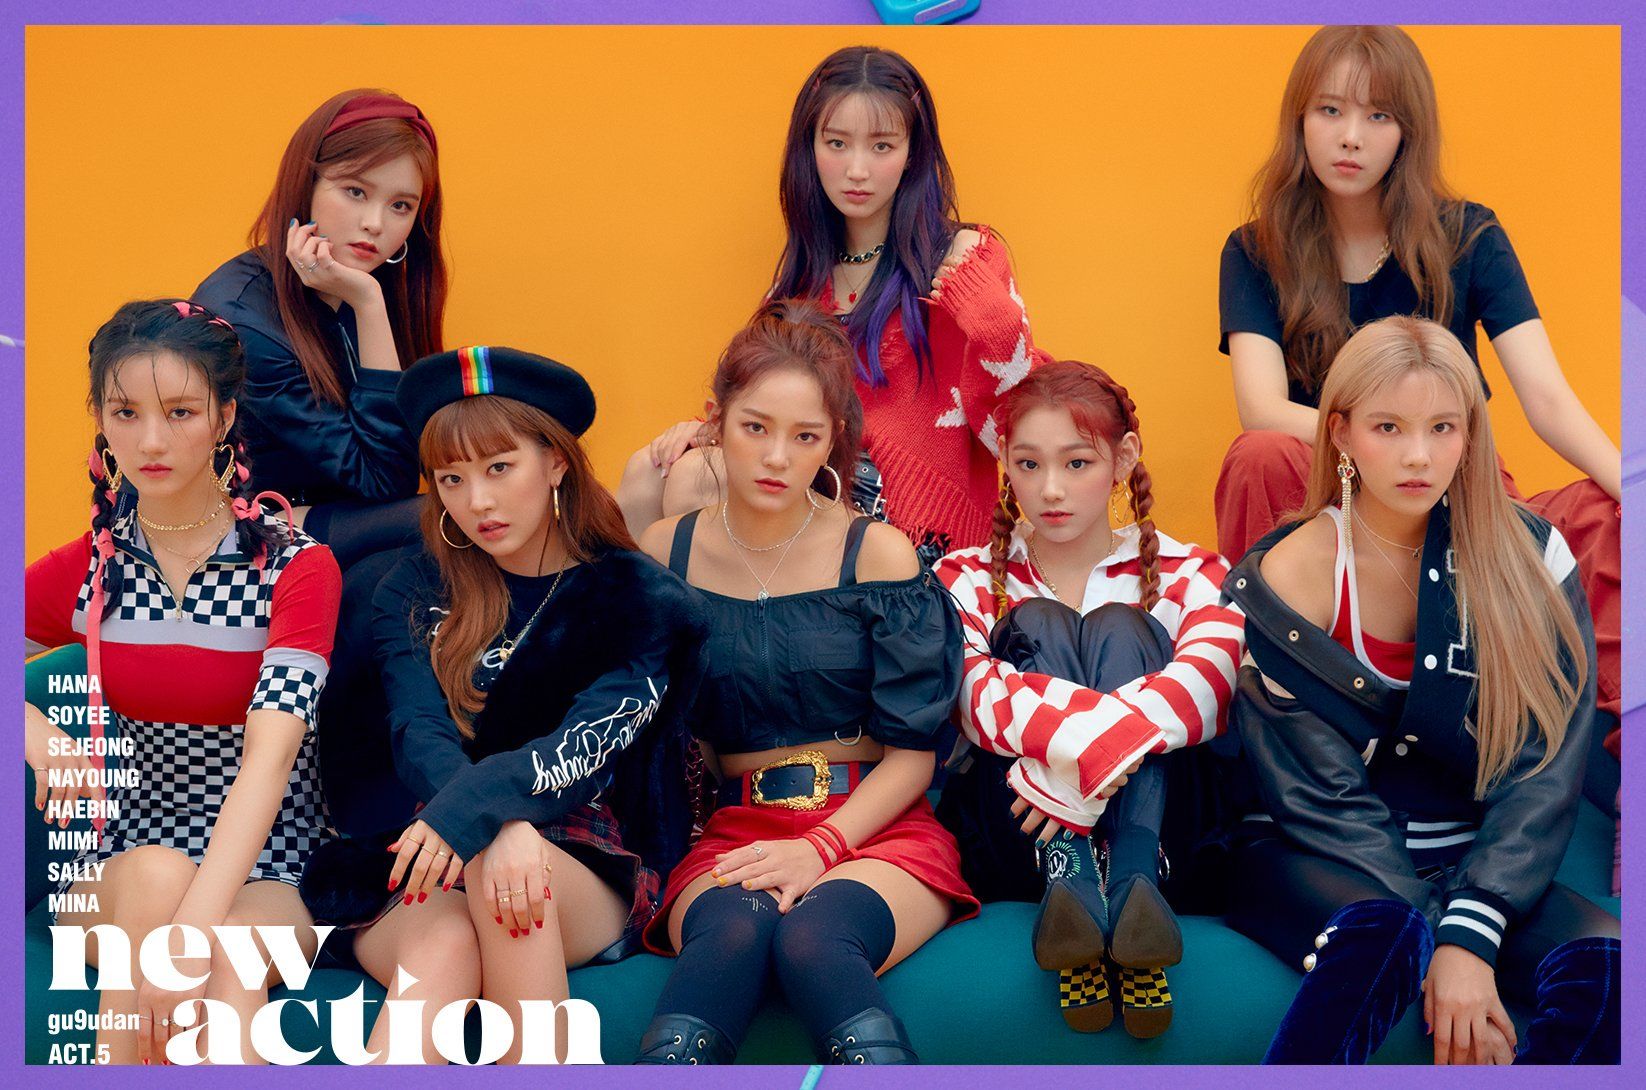 gugudan-announced-to-be-officially-disbanded-on-december-31